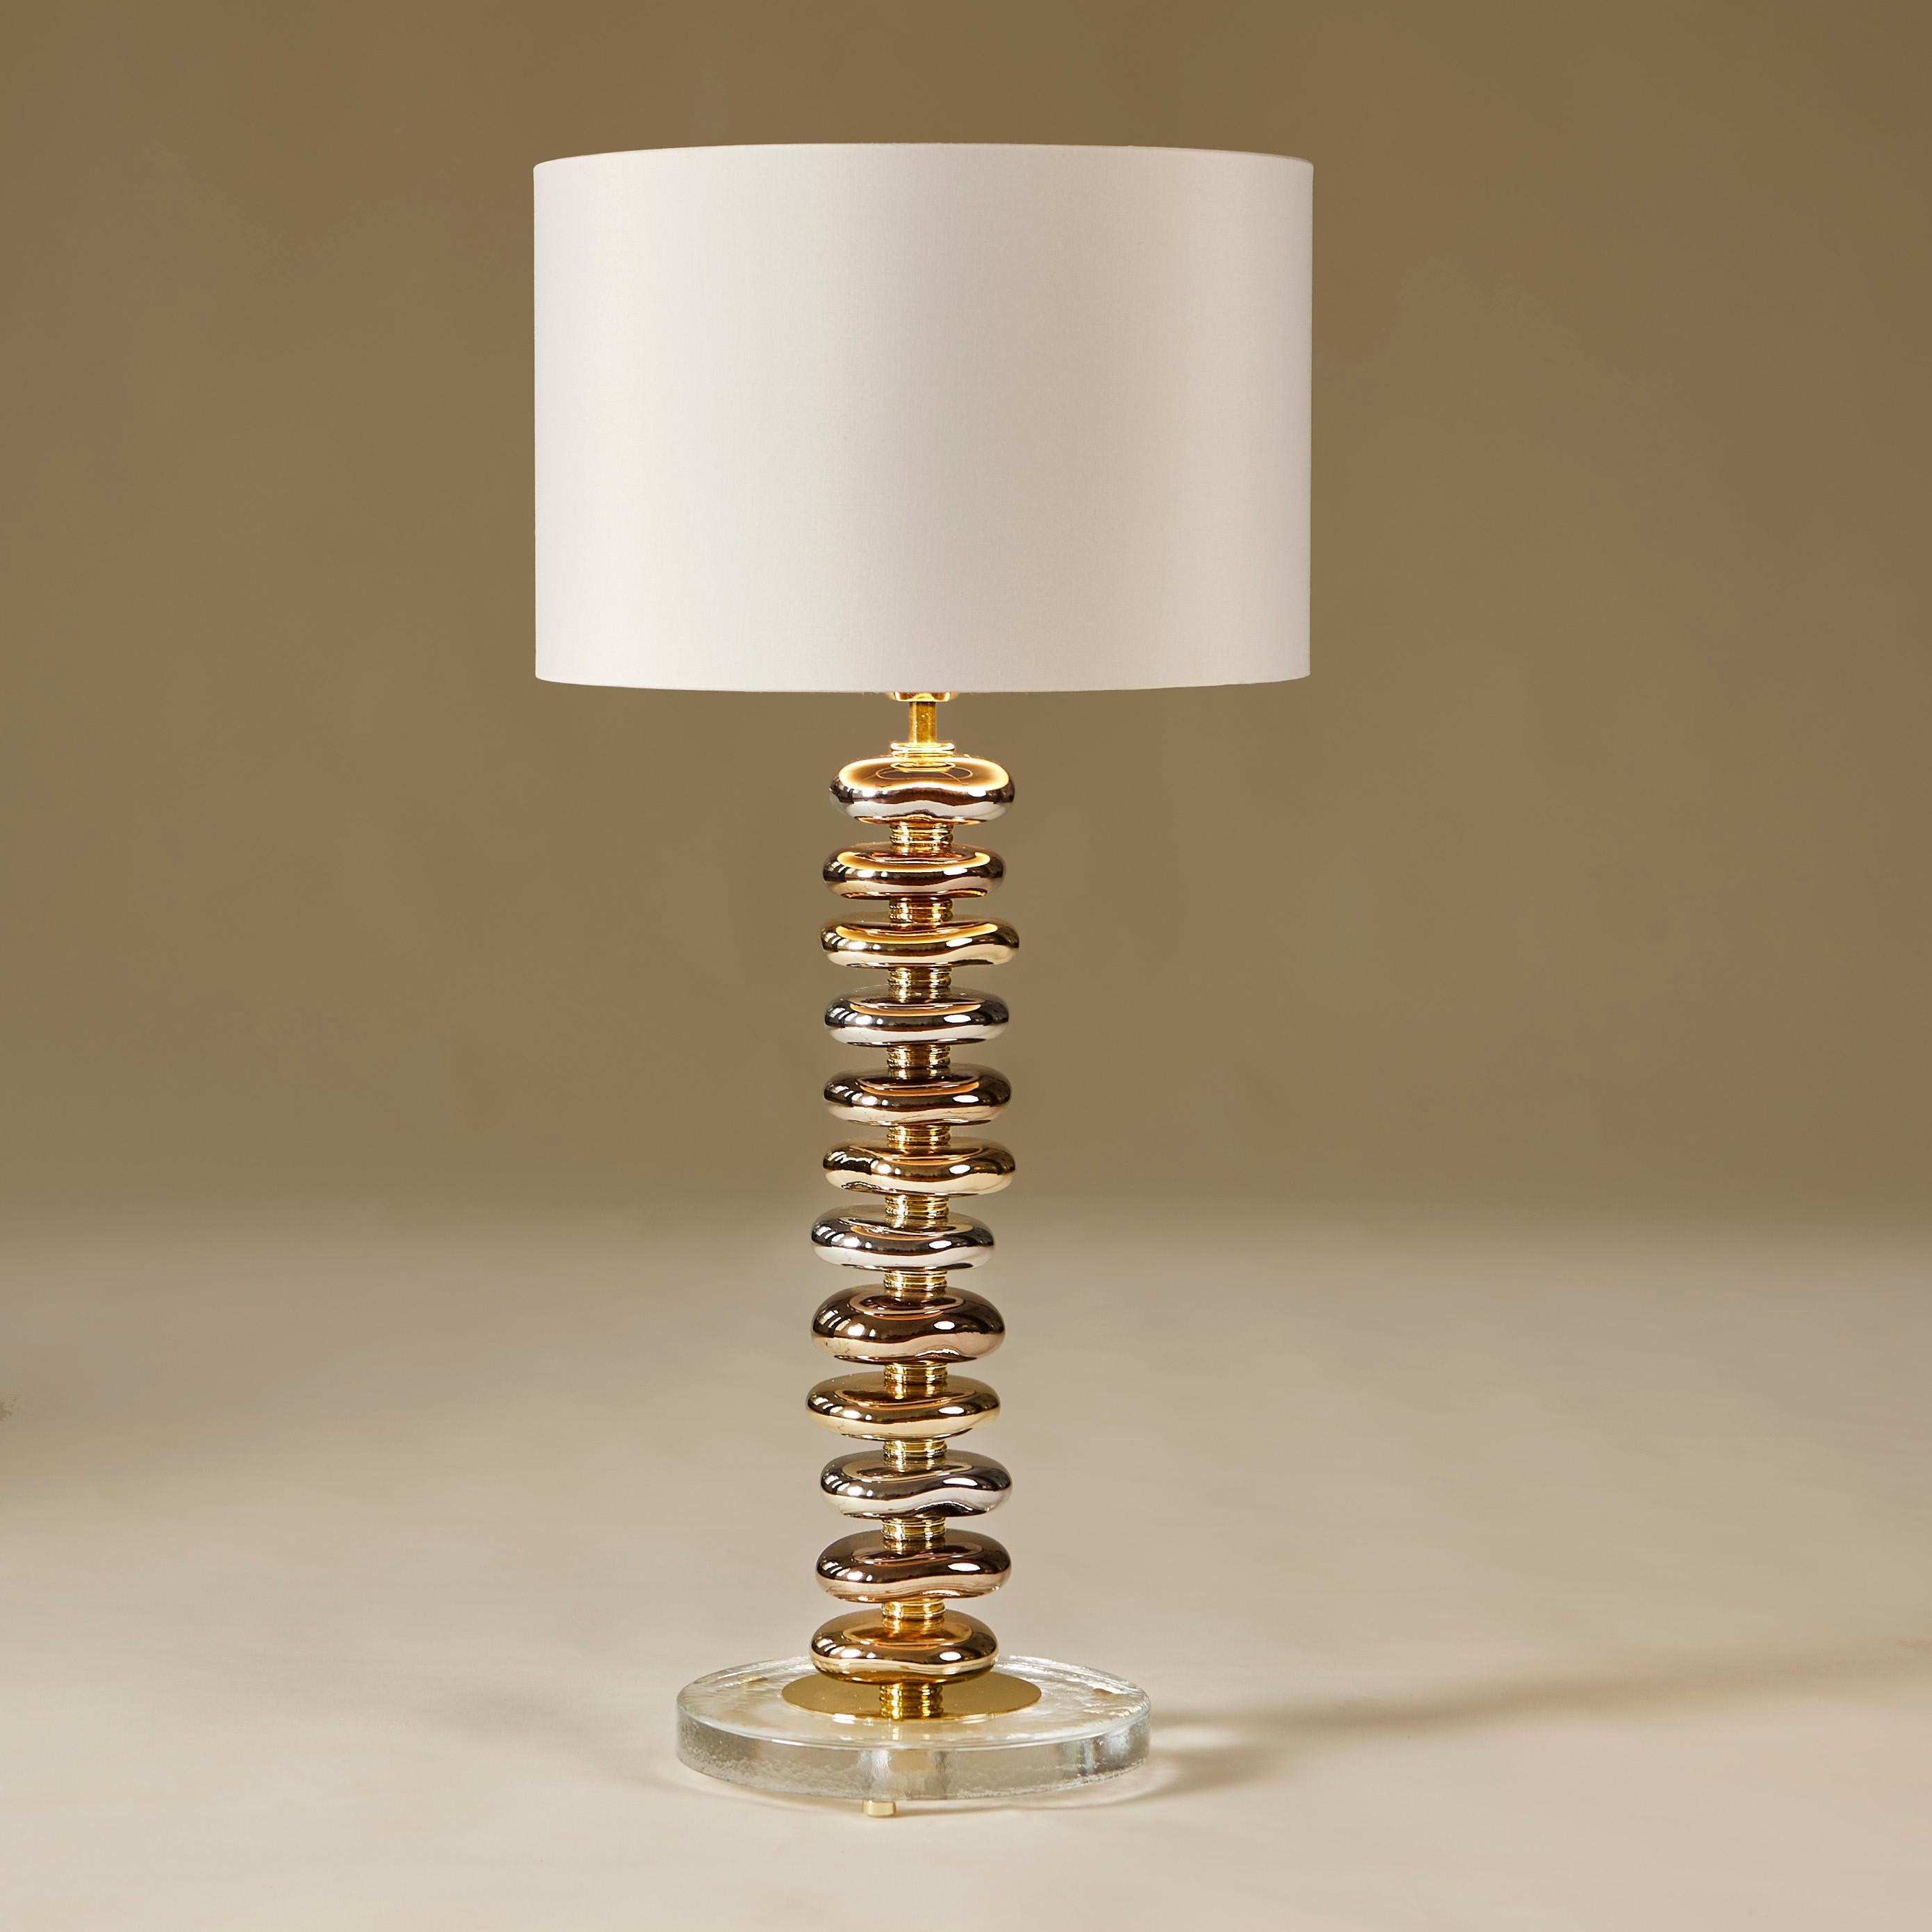 Italian Pair of Tall Murano Glass Metallic and Brass ‘Pebble’ Table Lamps For Sale